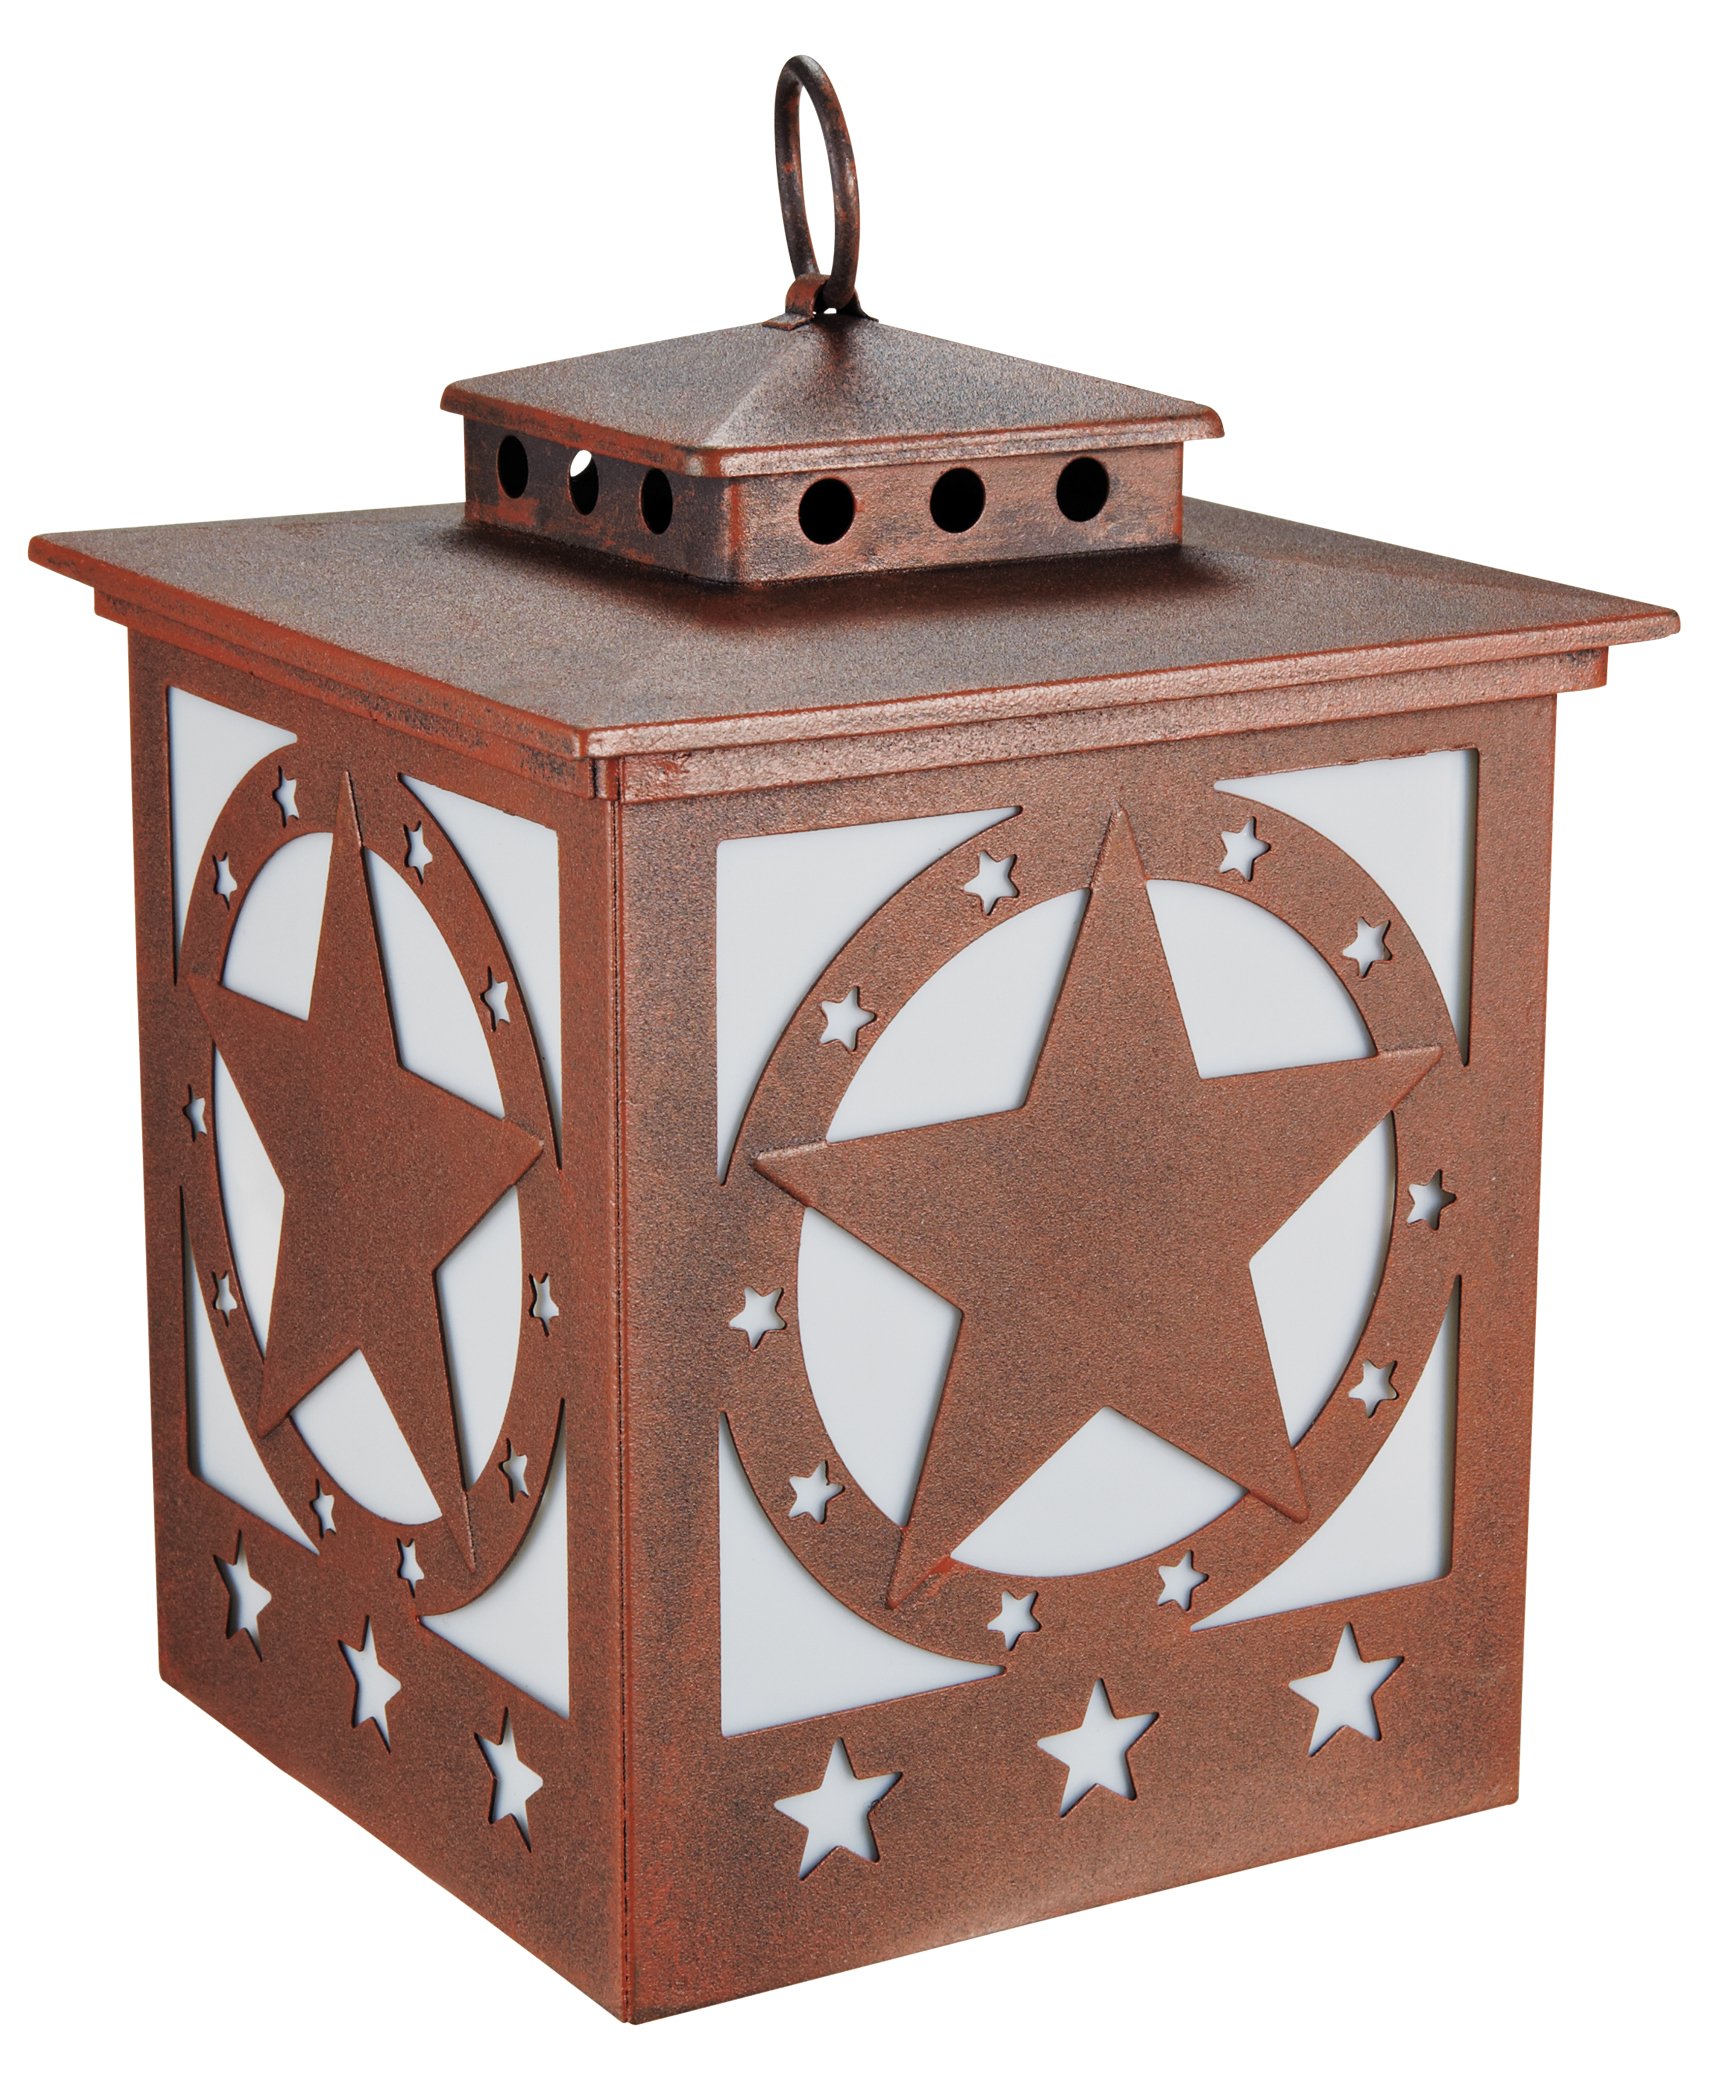 ScentSationals Texas Lone Star Rust Large Wax Warmers See Description For Deal. 